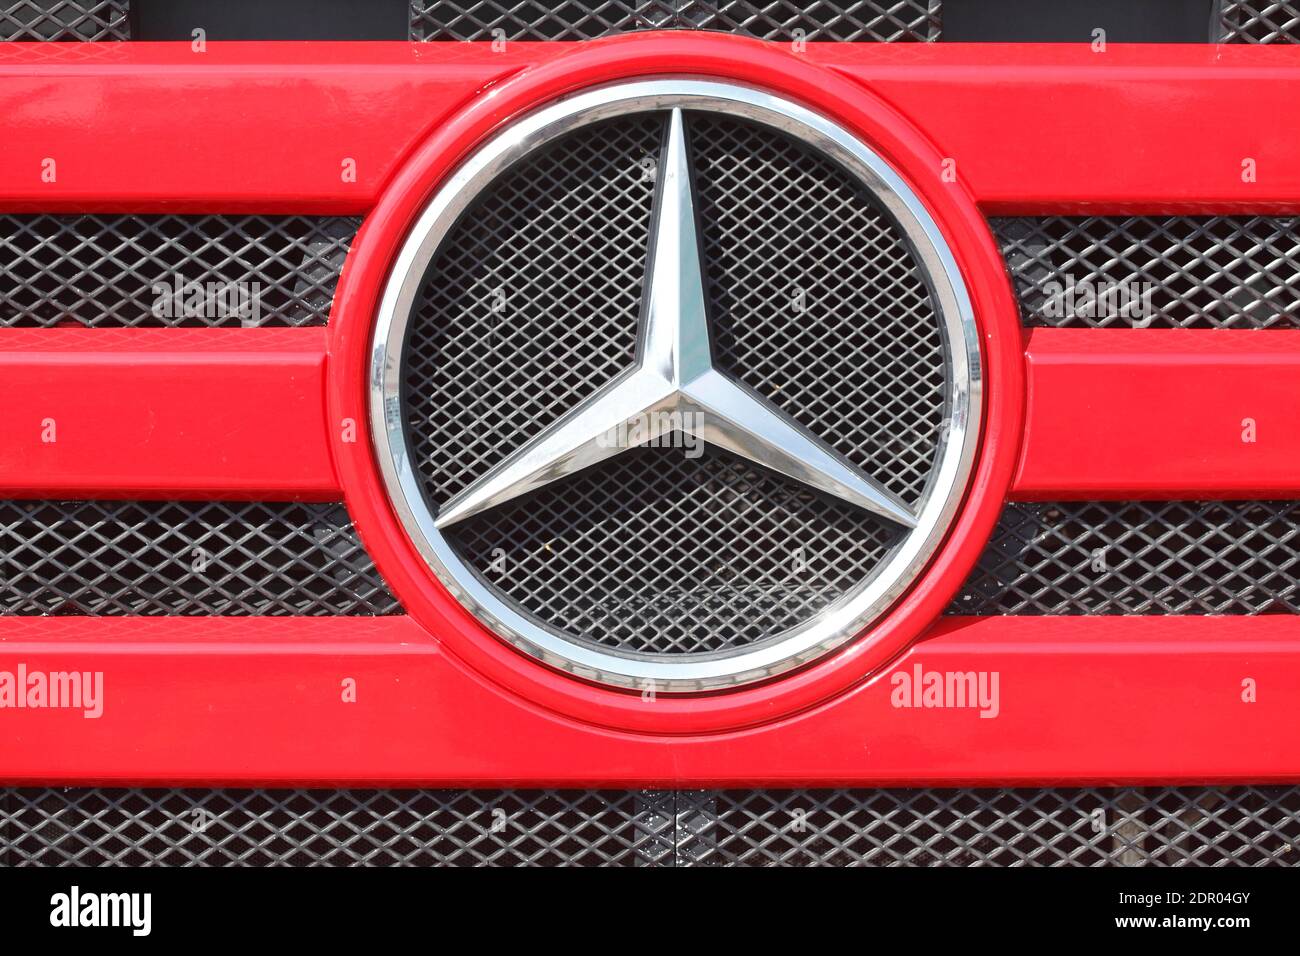 Mercedes Benz logo, Mercedes star on a red radiator grill of a truck, Germany Stock Photo